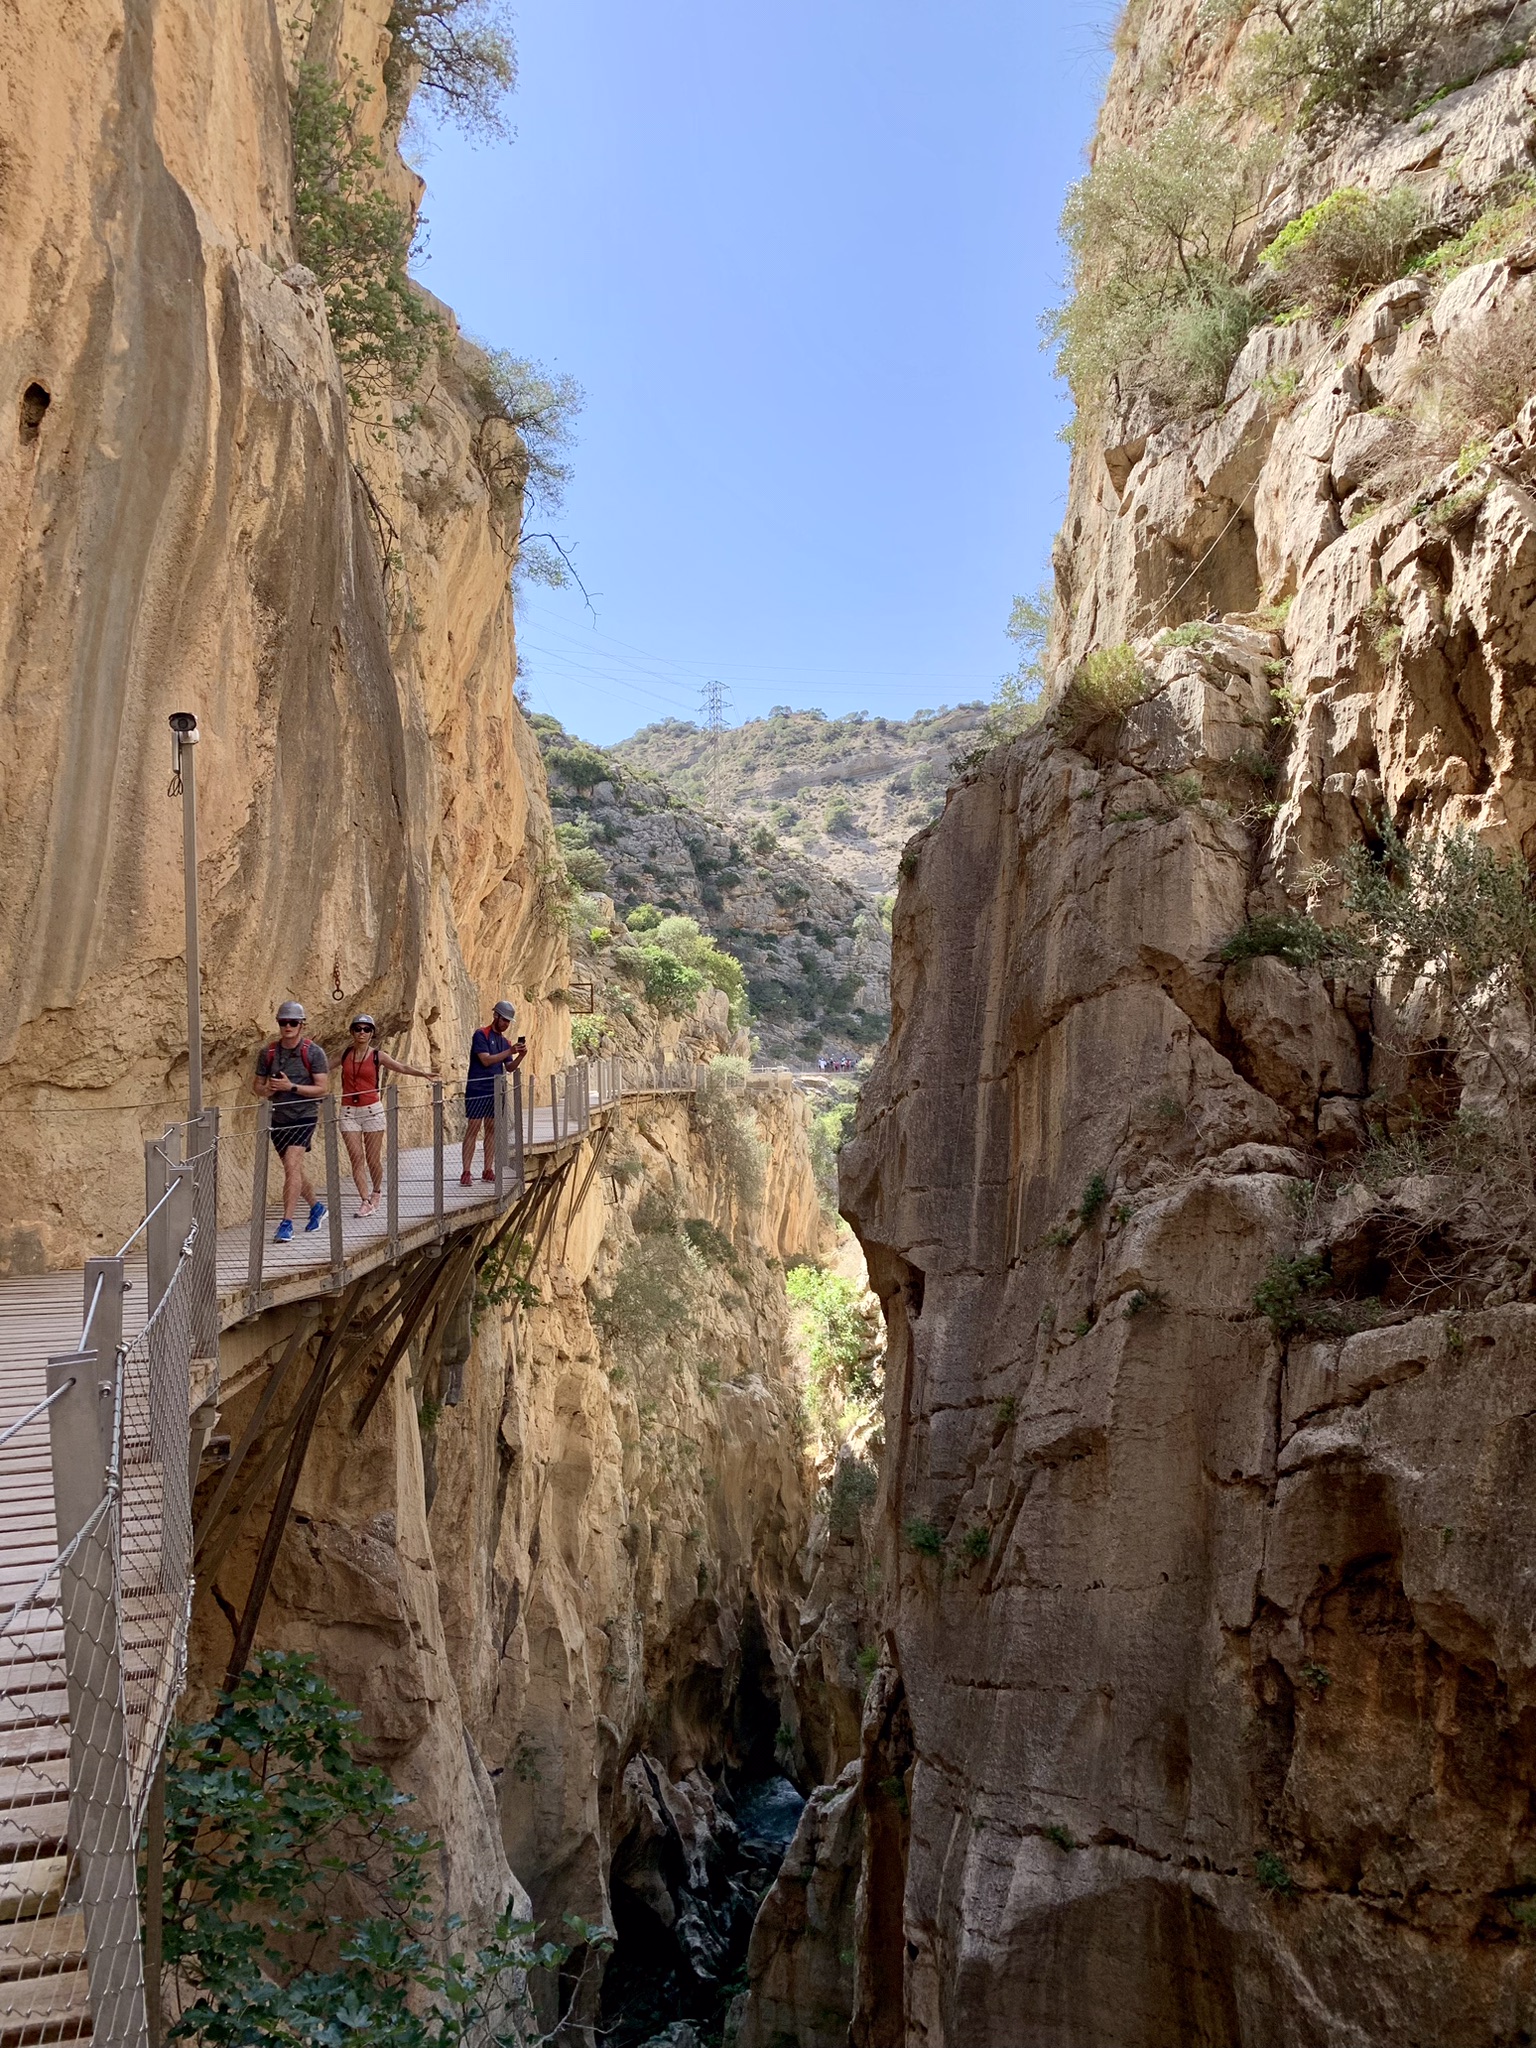 Walkway of the Caminito del Rey clinging to the cliff face